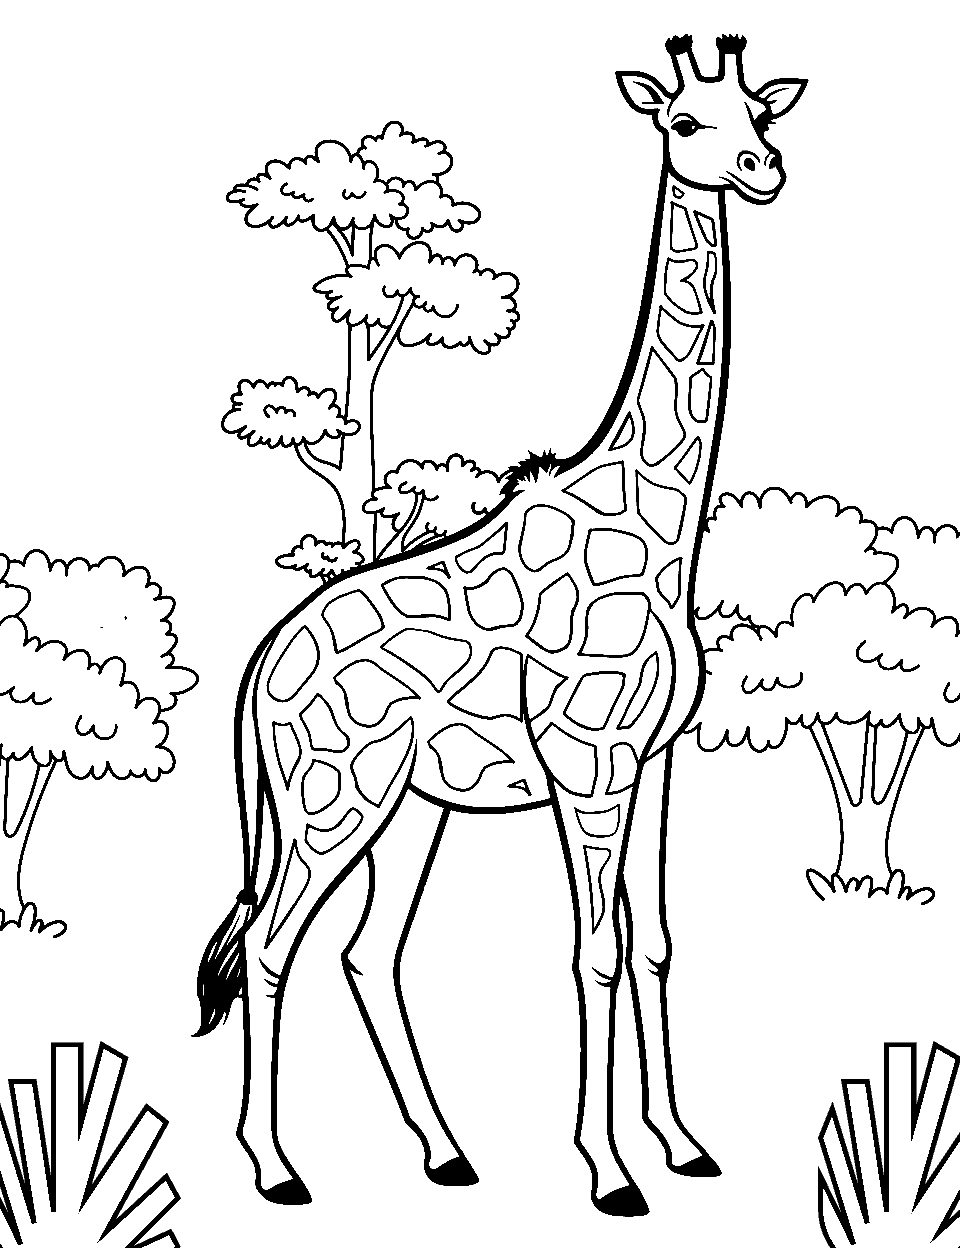 Realistic Safari Giraffe Coloring Page - A giraffe grazing in the grasslands with a distant view of acacia trees.